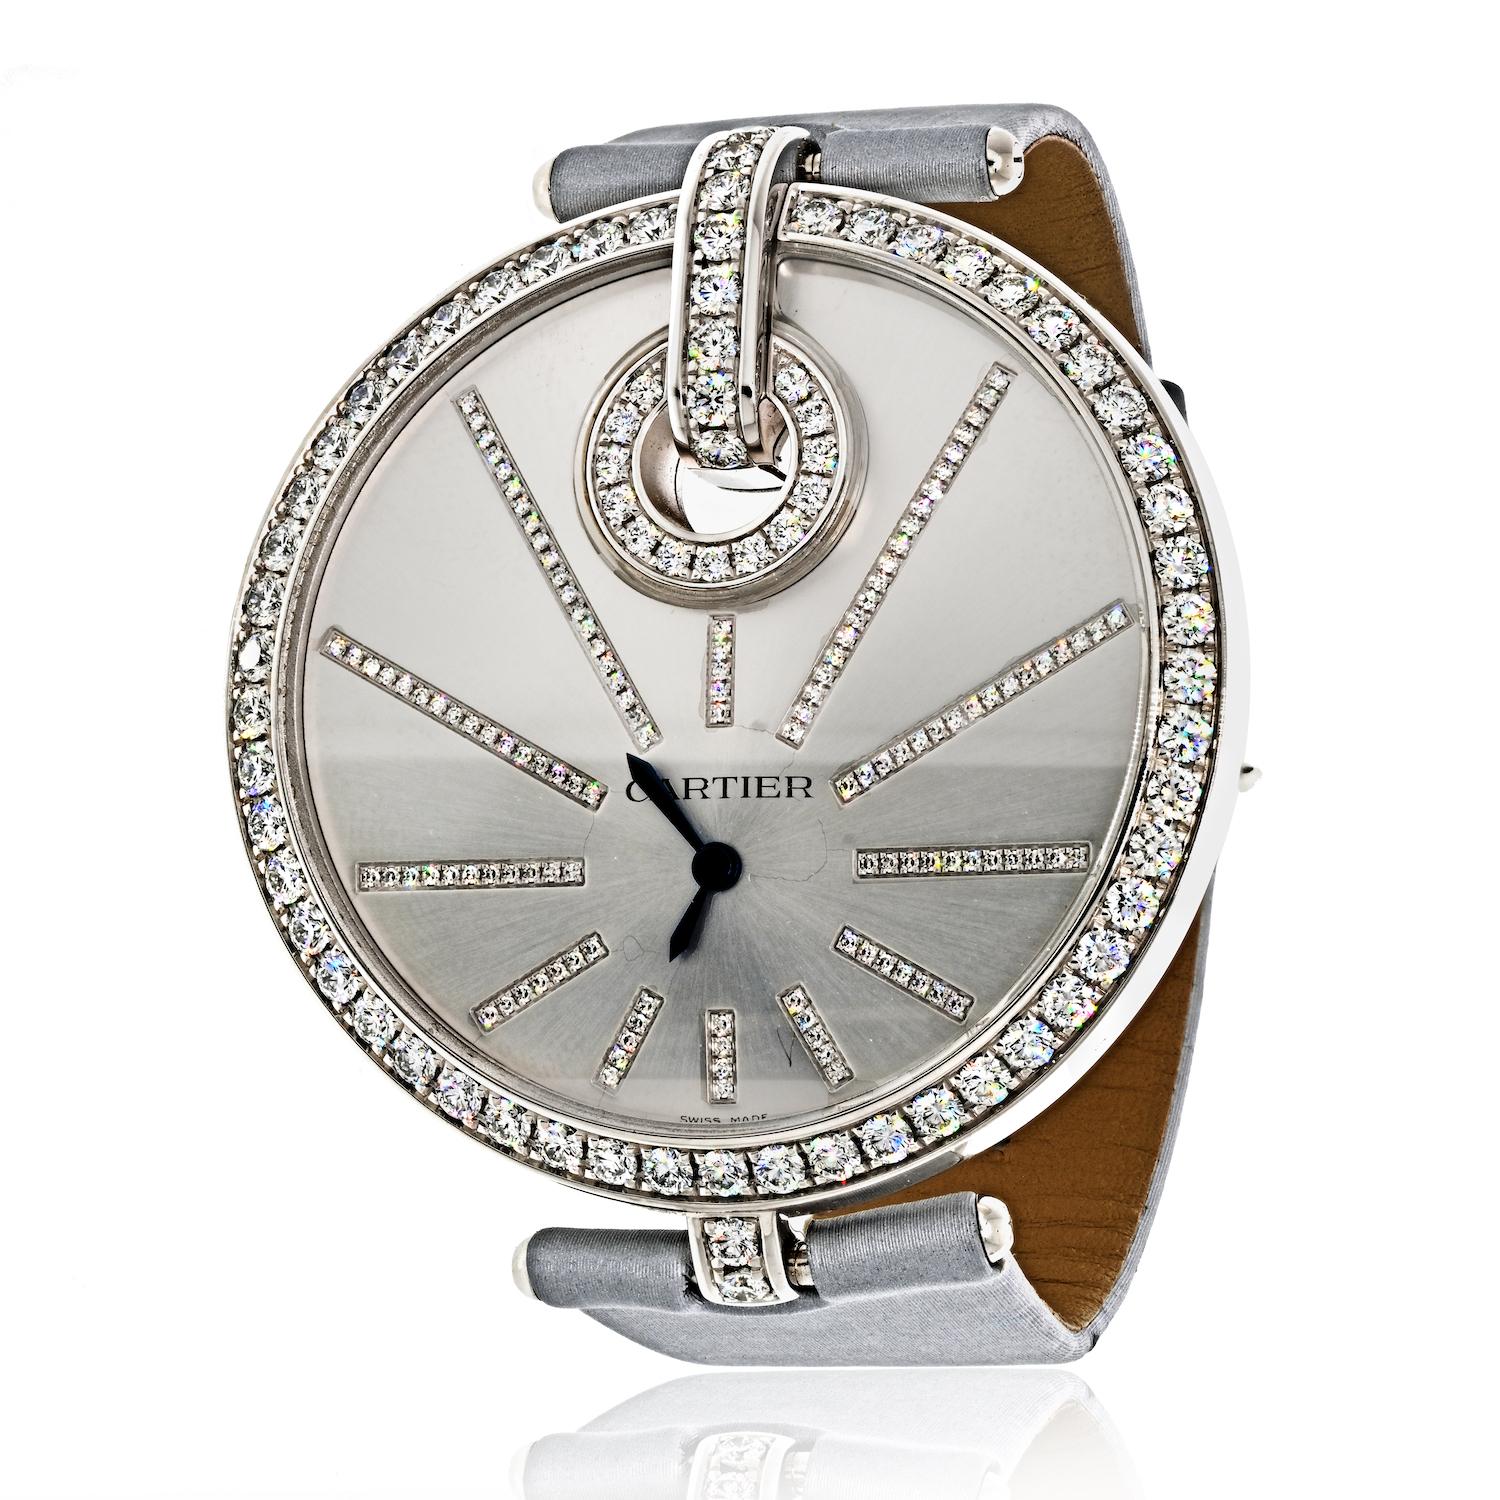 The Cartier ladies Captive diamond wristwatch is a stunning timepiece that exudes elegance and sophistication. The large round case, measuring approximately 50mm in diameter, features a bezel, dial, and buckle set with numerous round diamonds,